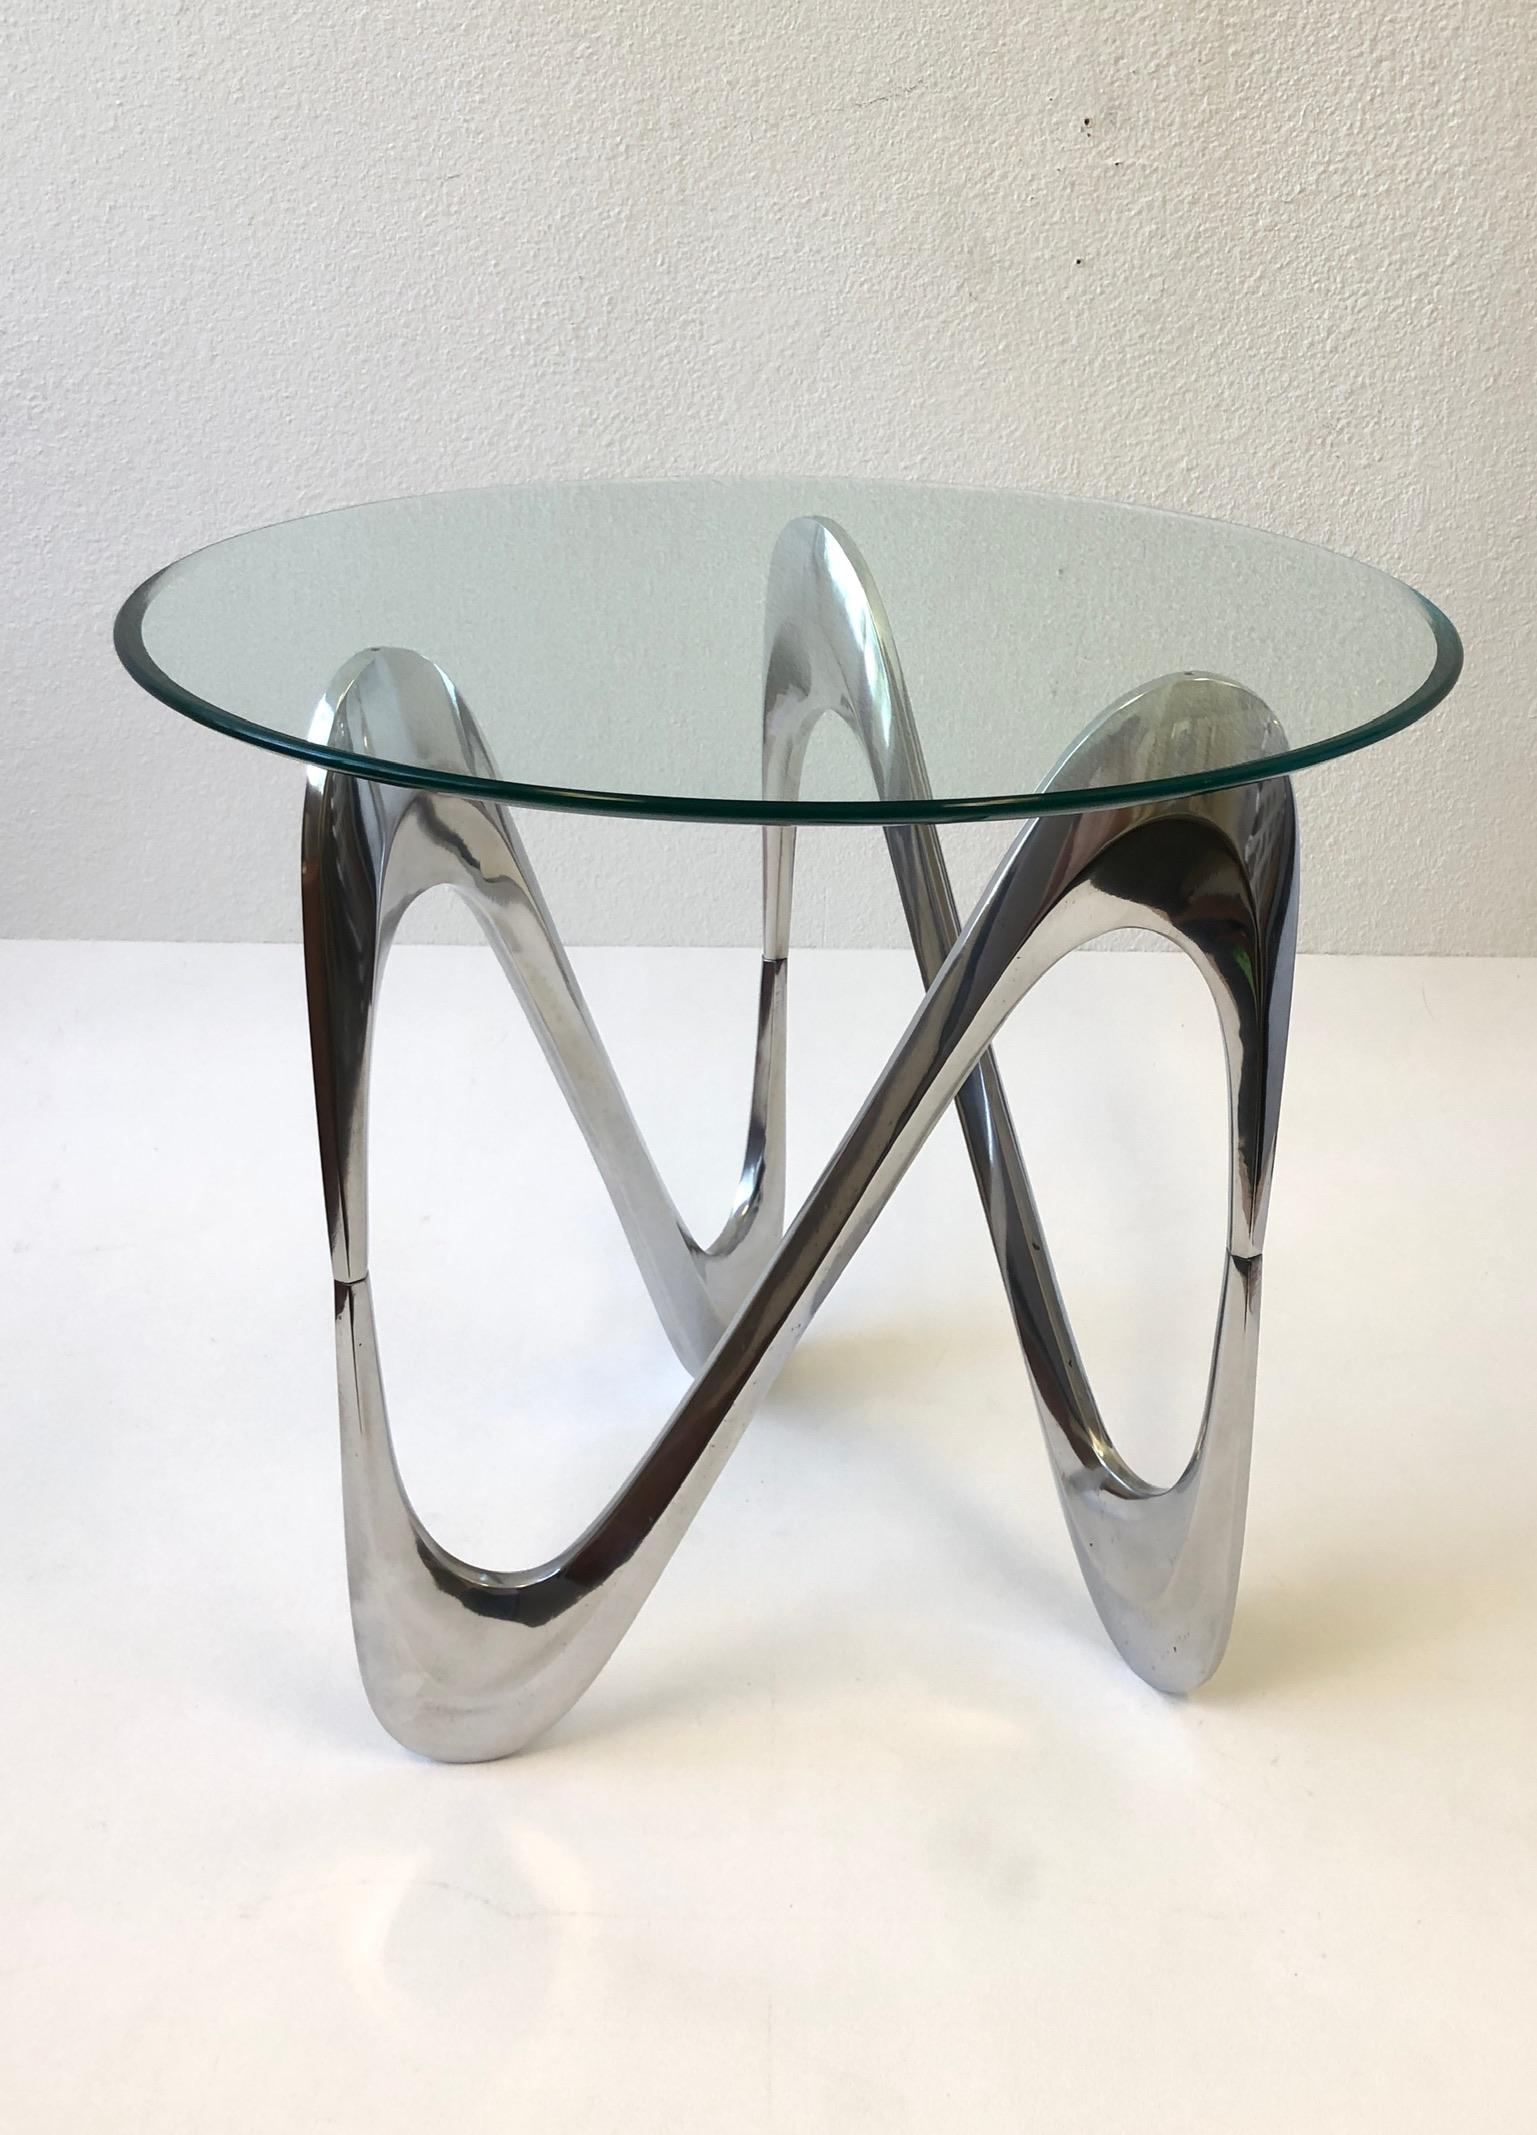 German Pair of Polish Aluminum Side Tables by Knut Hesterberg